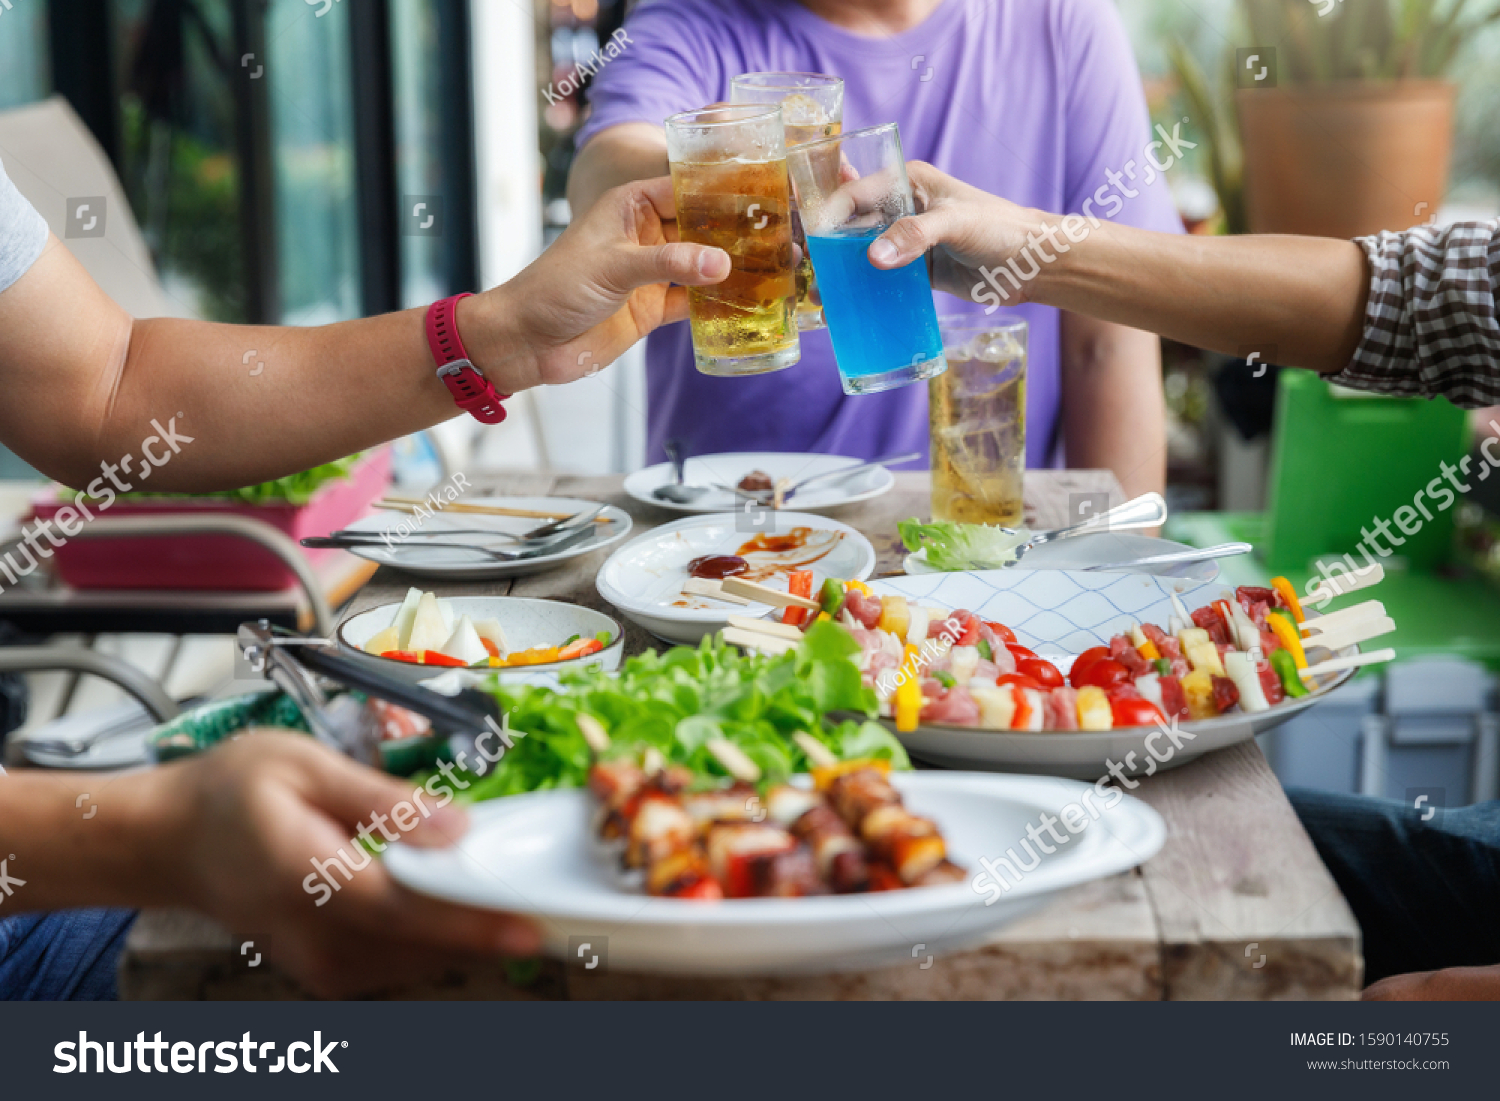 Young men cheers for a drink at a BBQ party between friends. Food, drink, people and family time concept. #1590140755